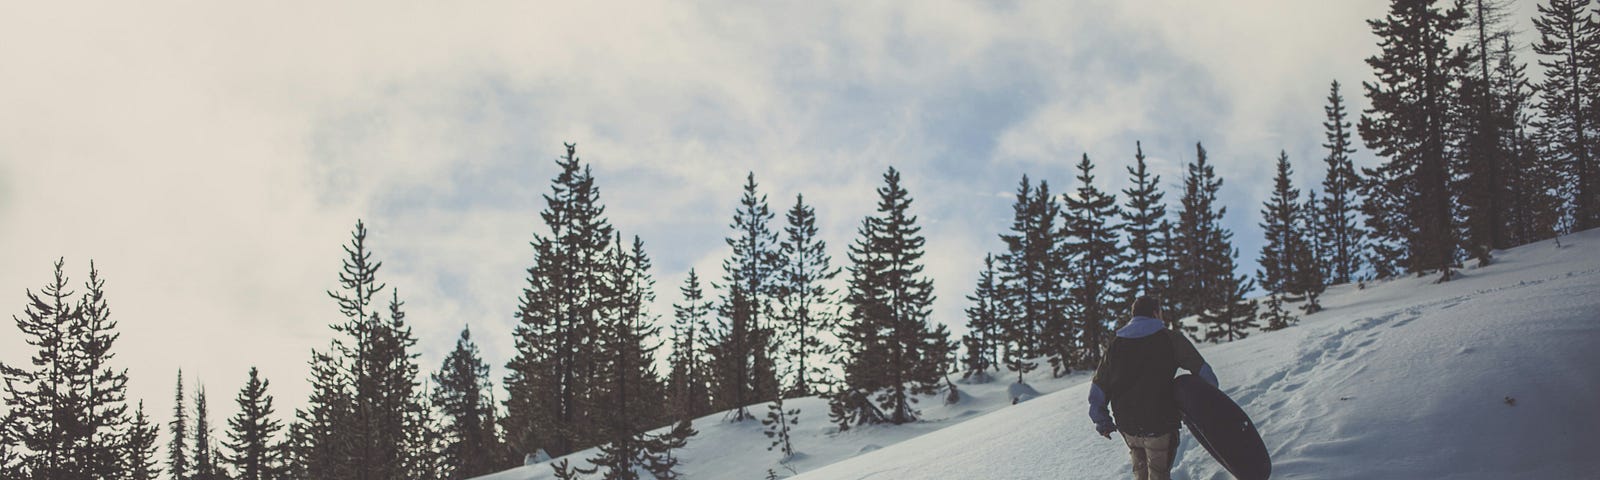 person in snow pants and winter coat walking up a hill with an inner tube under their arm, pine trees in the distance